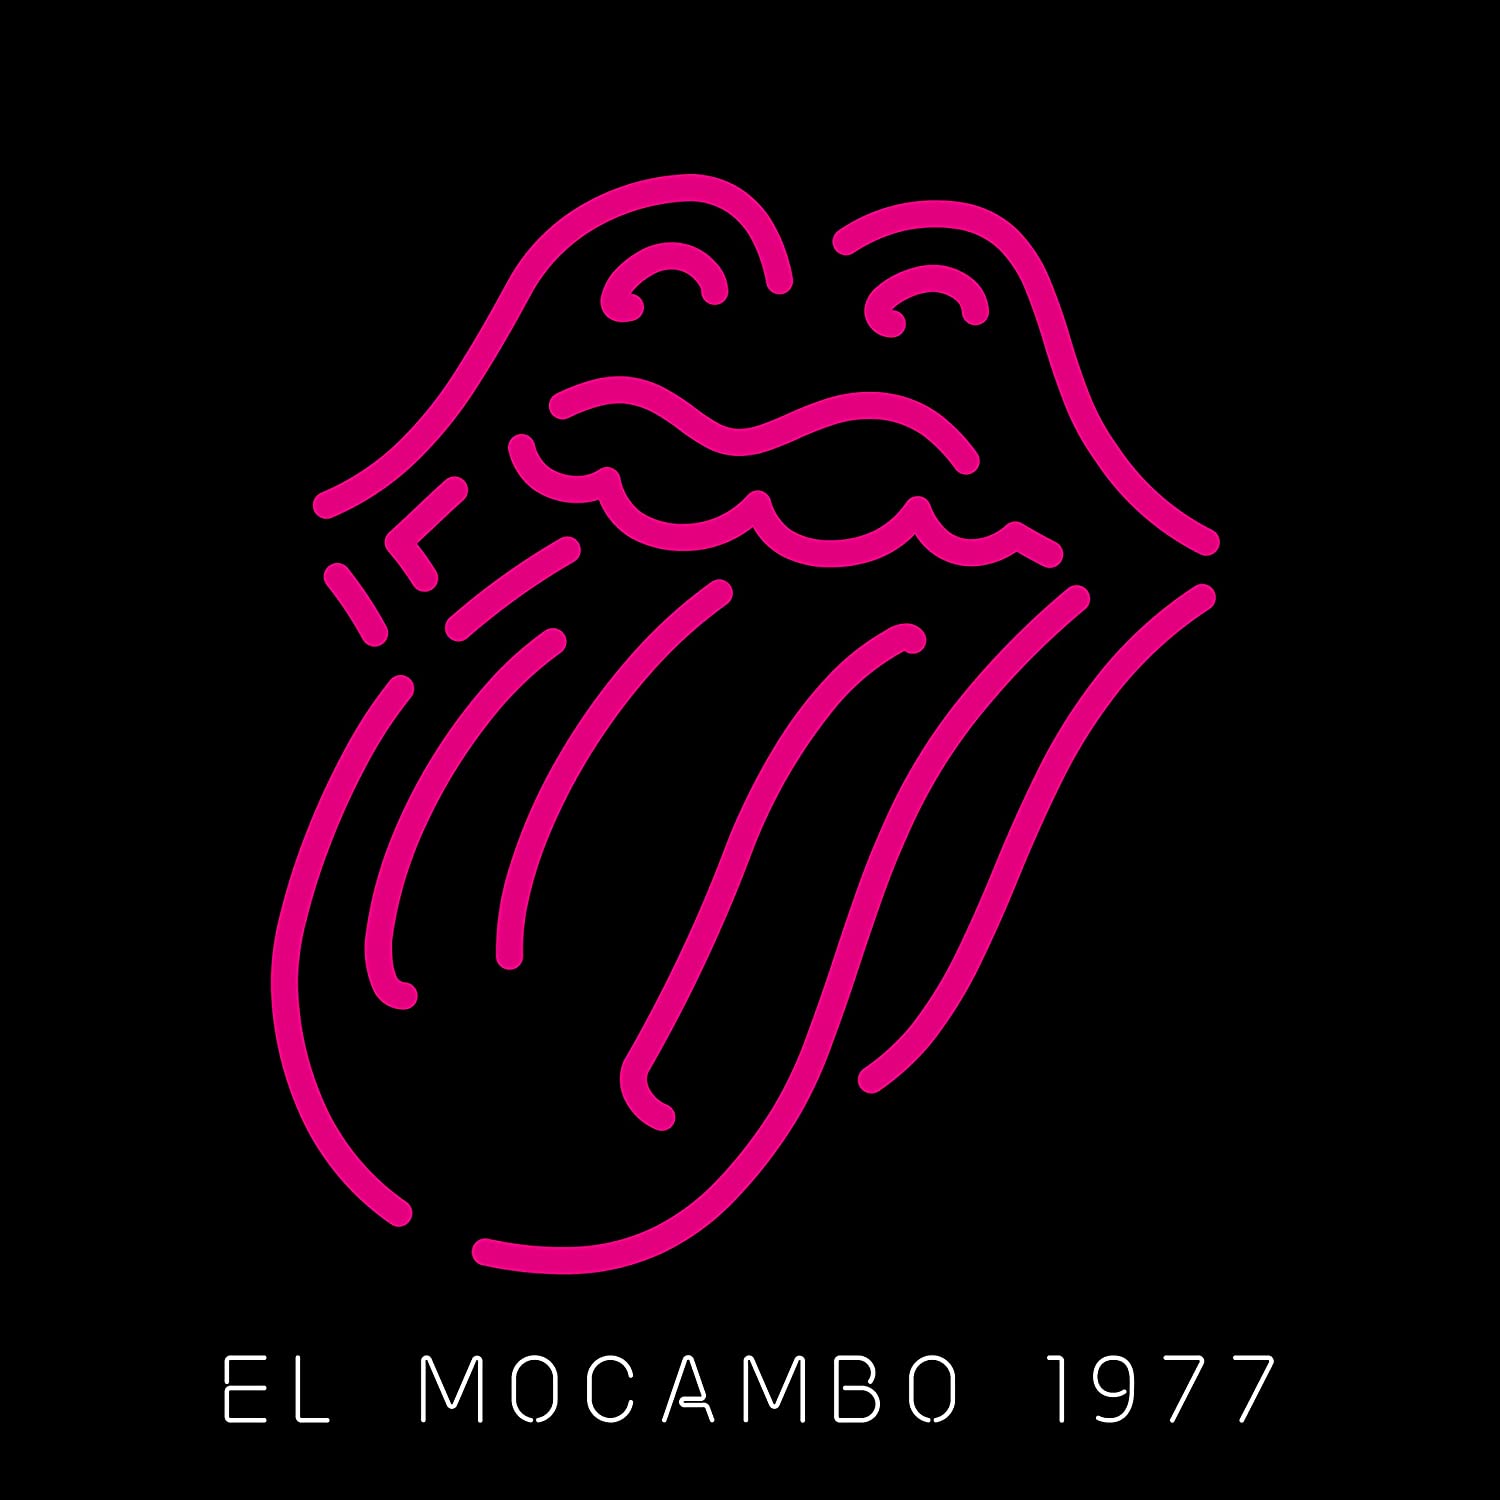 Rolling Stones Live At The El Mocambo